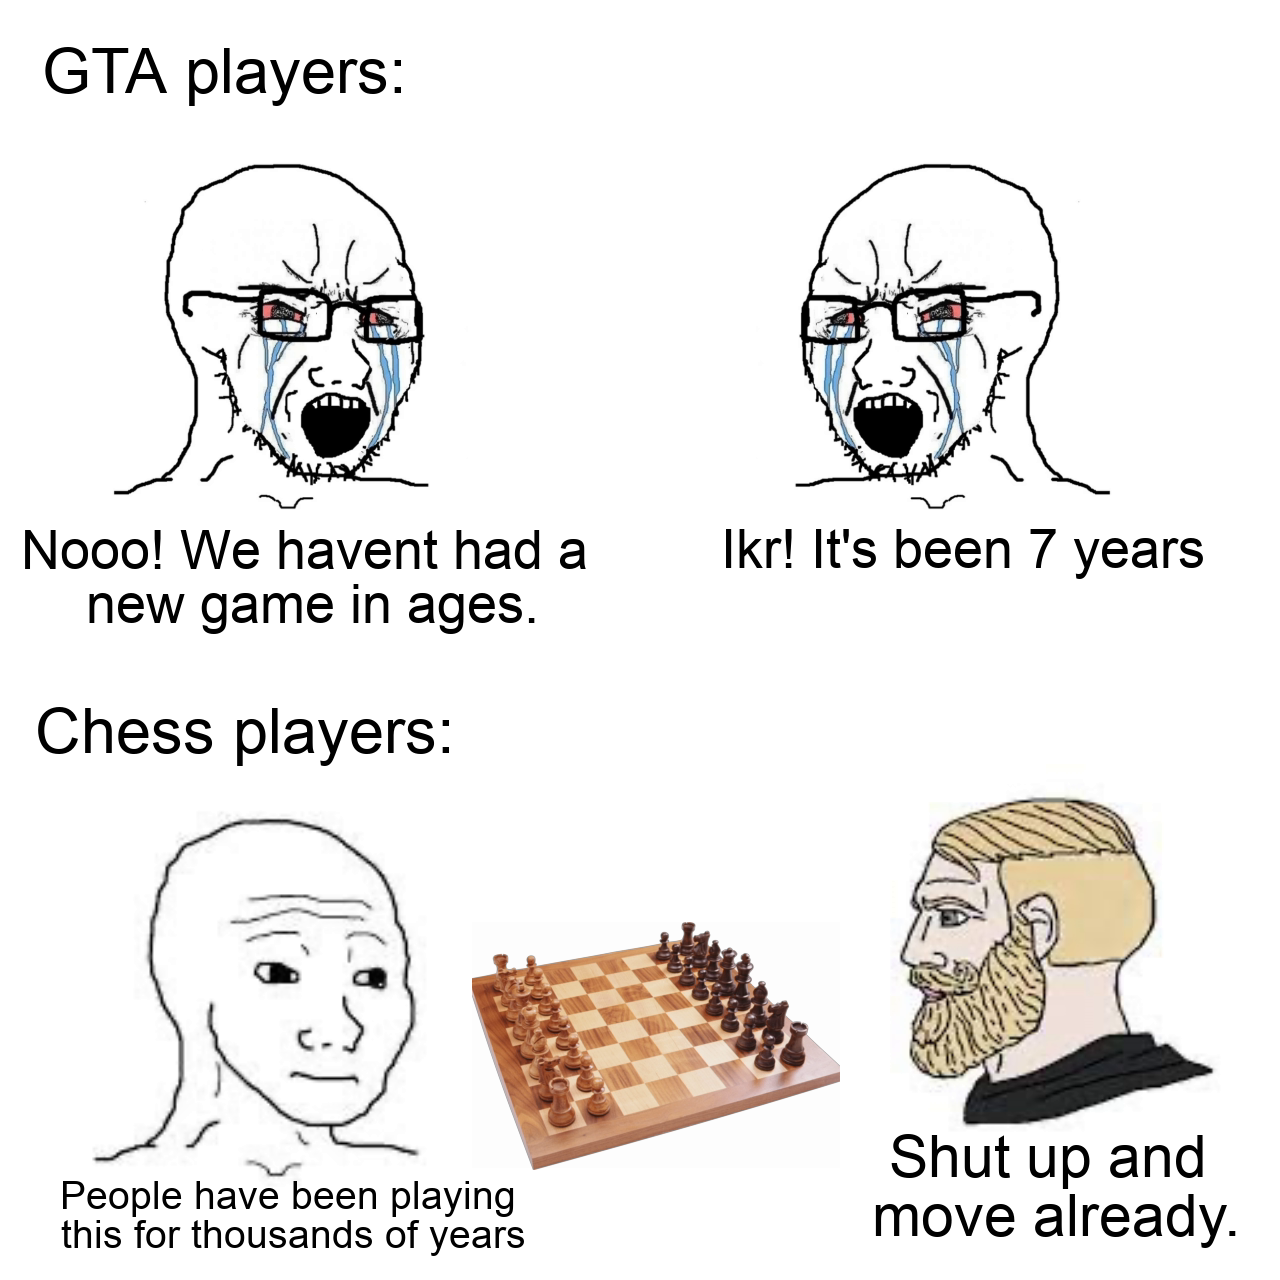 bloodhound non binary - Gta players Ikr! It's been 7 years Nooo! We havent had a new game in ages. Chess players People have been playing this for thousands of years Shut up and move already.